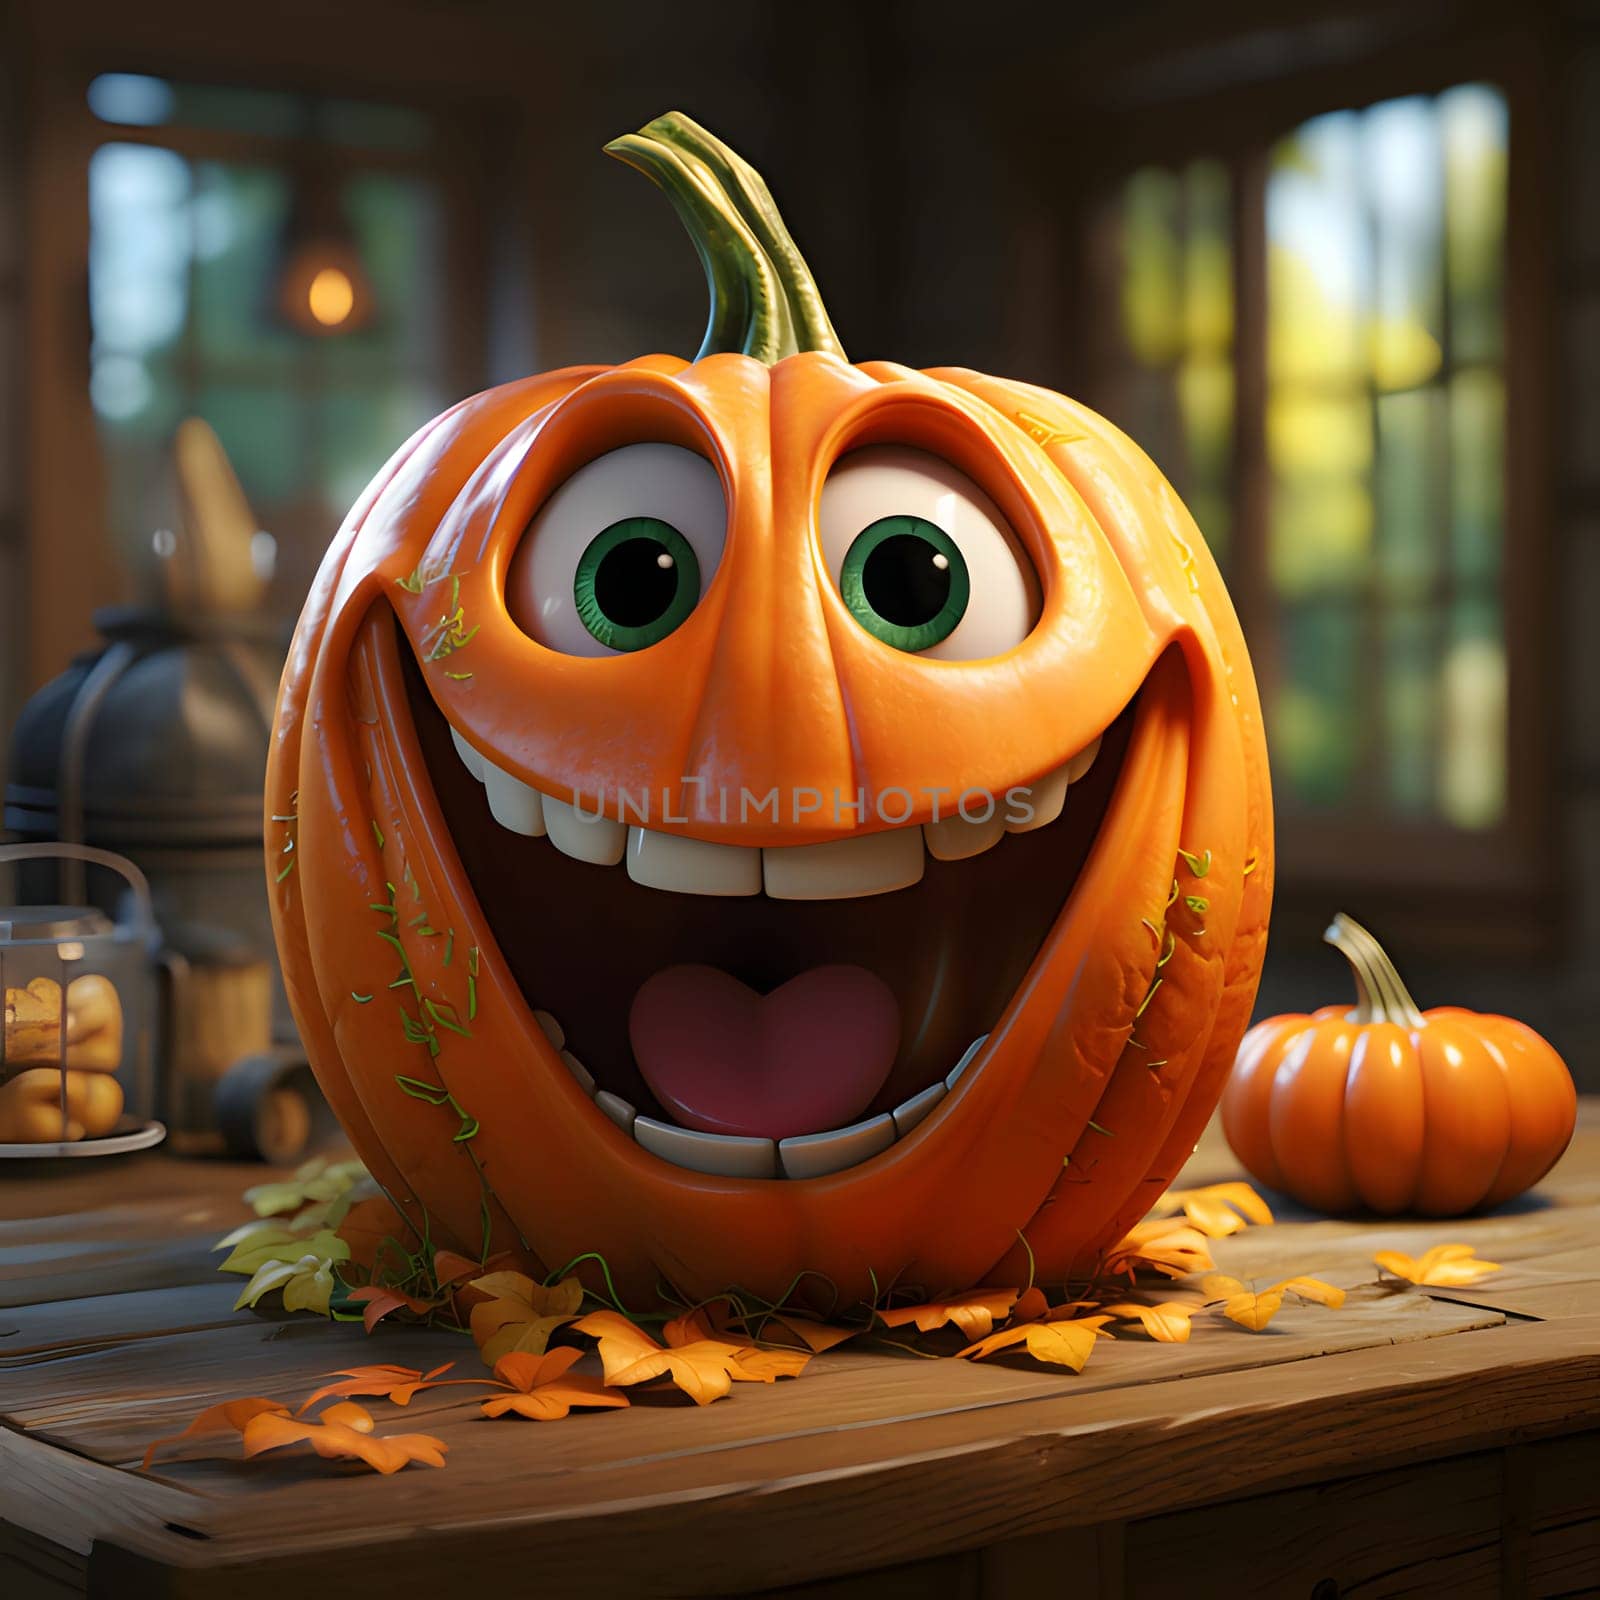 Animated cartoon jack-o-lantern pumpkin with giant smile and eyes, a Halloween image. by ThemesS